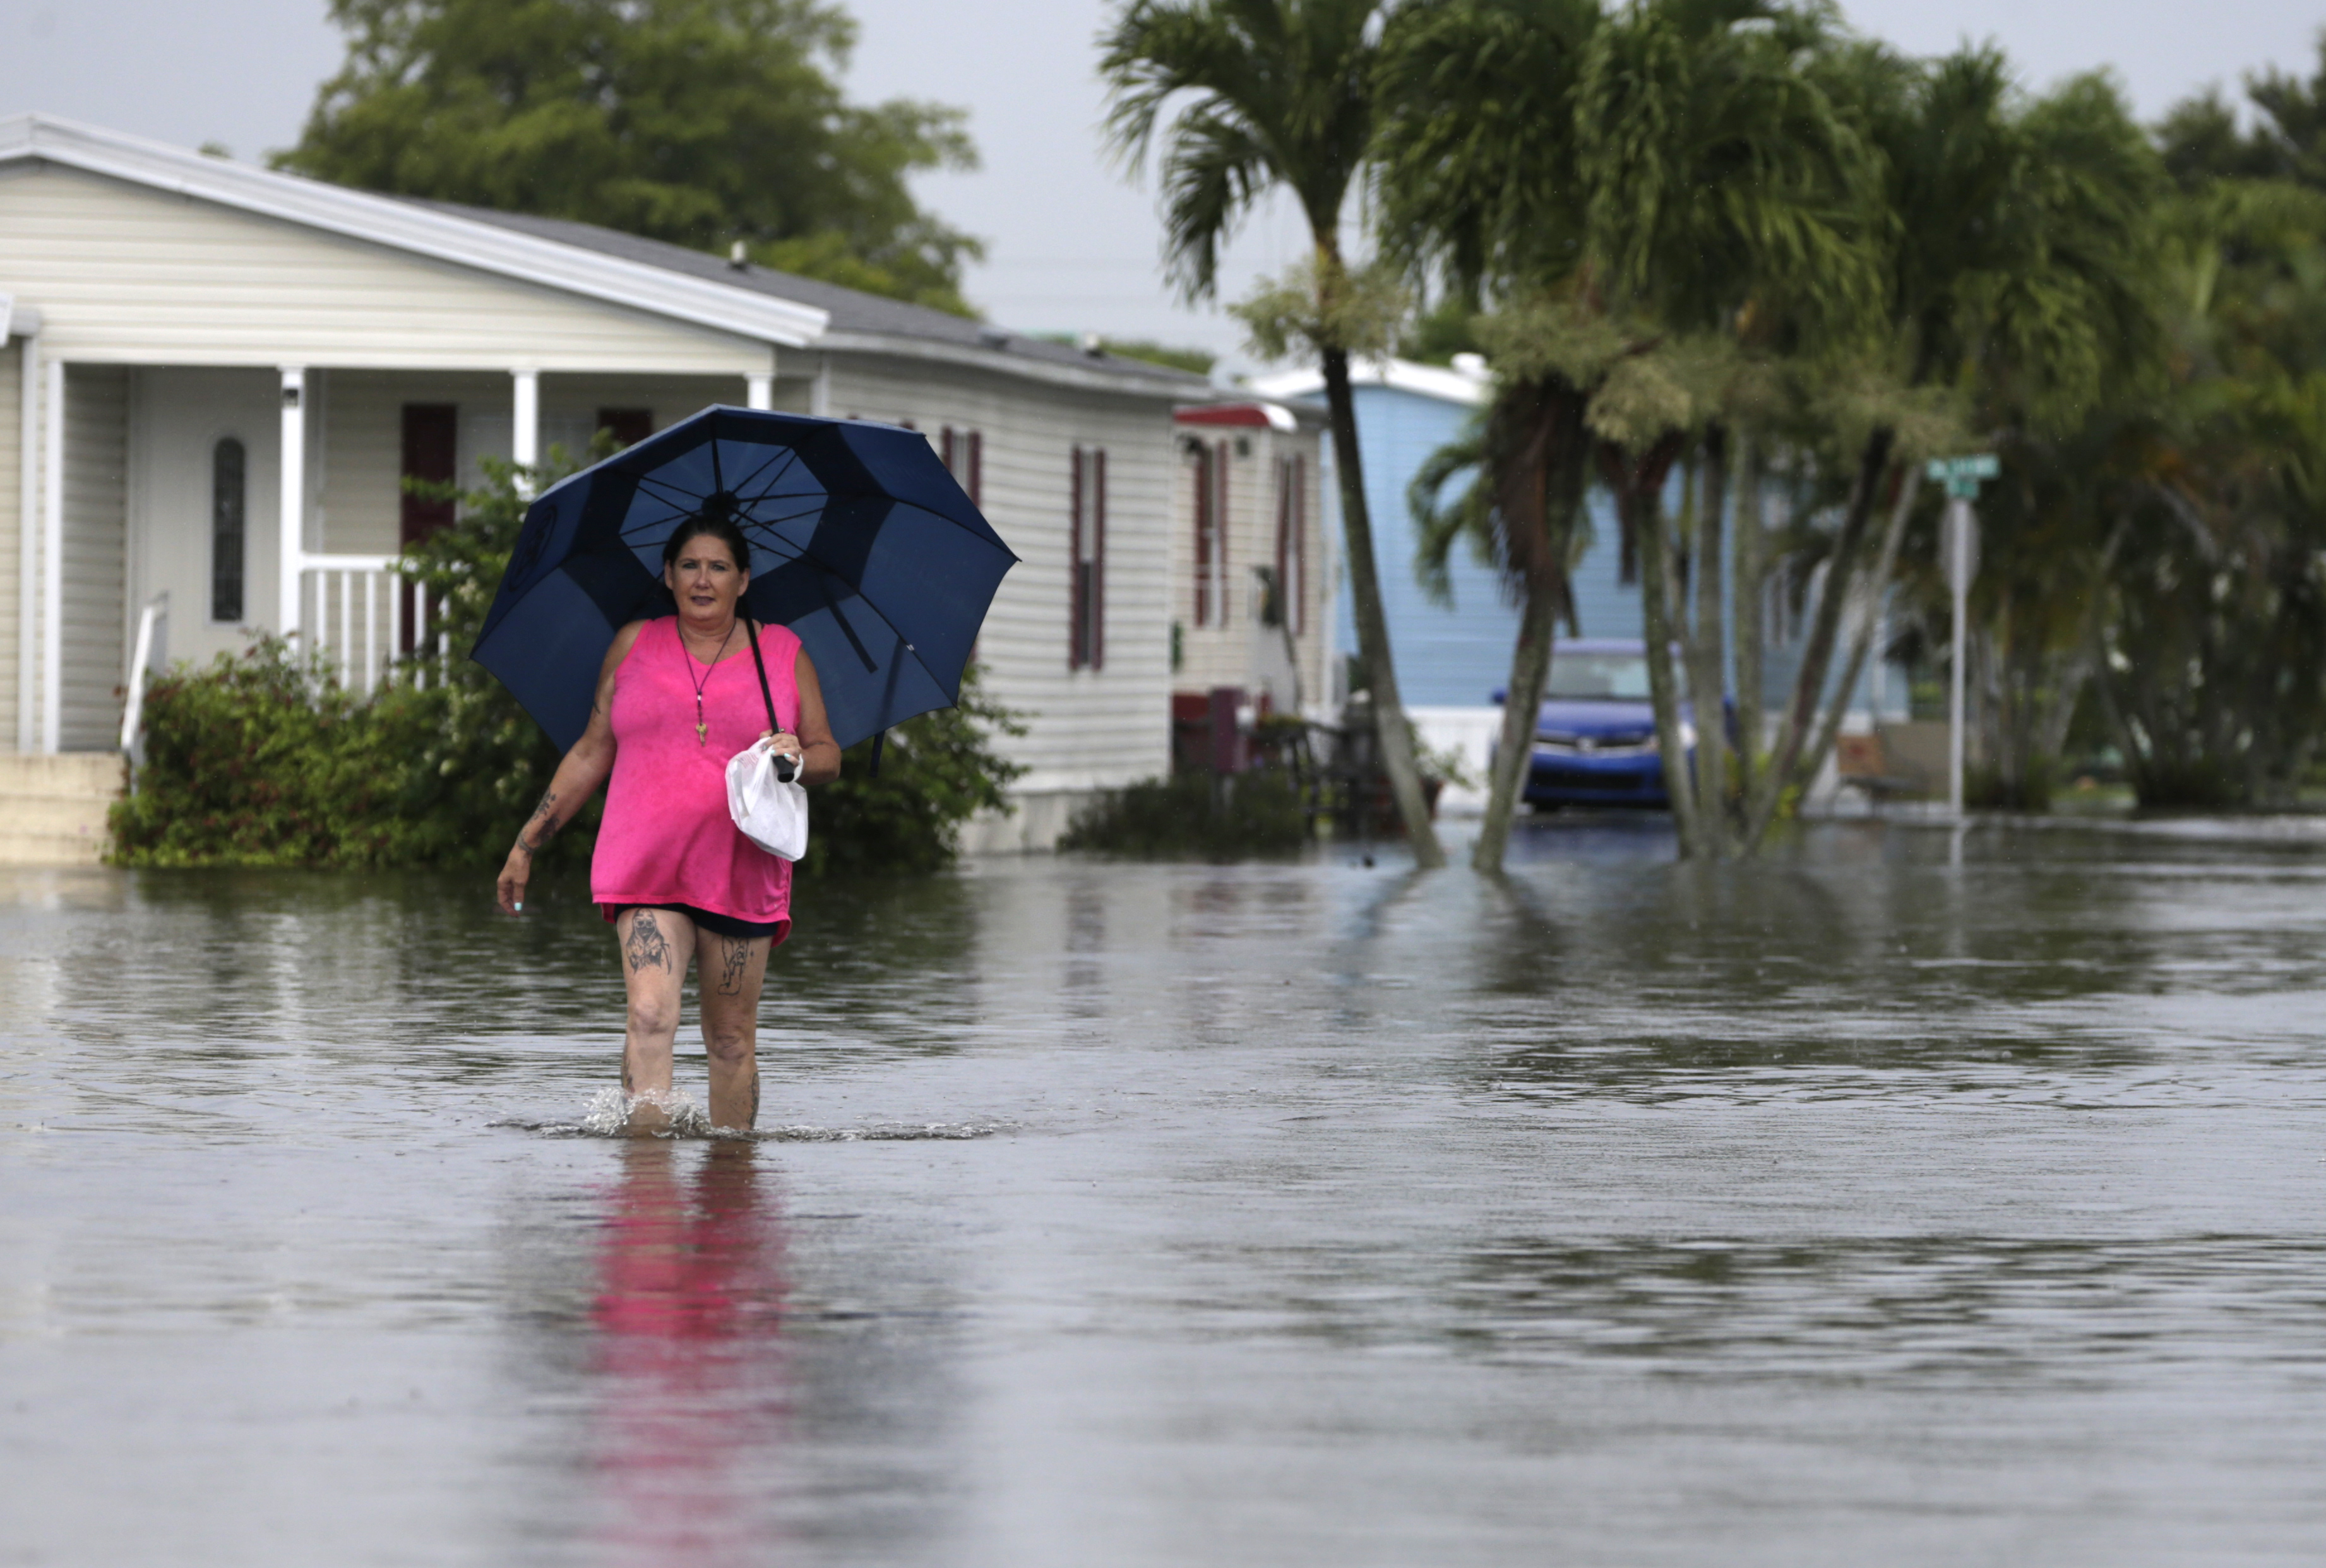 Peggy Wallace walks to her home in the Sunshine Village mobile home park, Wednesday, June 7, 2017, in Davie, Fla. Several South Florida cities set rainfall records as heavy rain continues to fall, bringing the potential for further flooding. (AP Photo/Lynne Sladky)